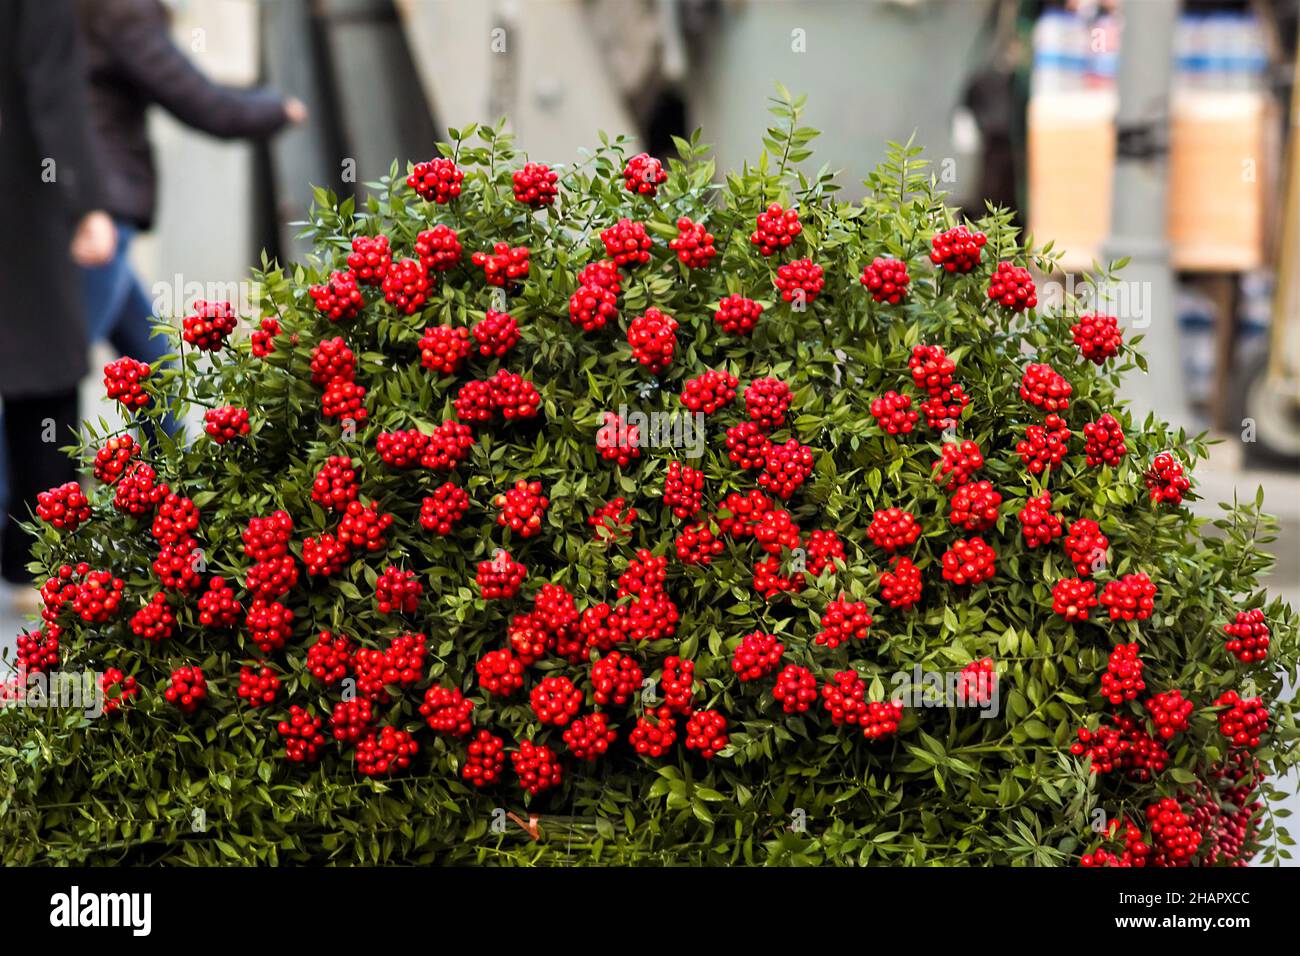 Kokina,Butcher's broom is old an Istanbul tradition when christmas comes.Combination red flowers bouquets piling at flower seller.Backgrounds Stock Photo